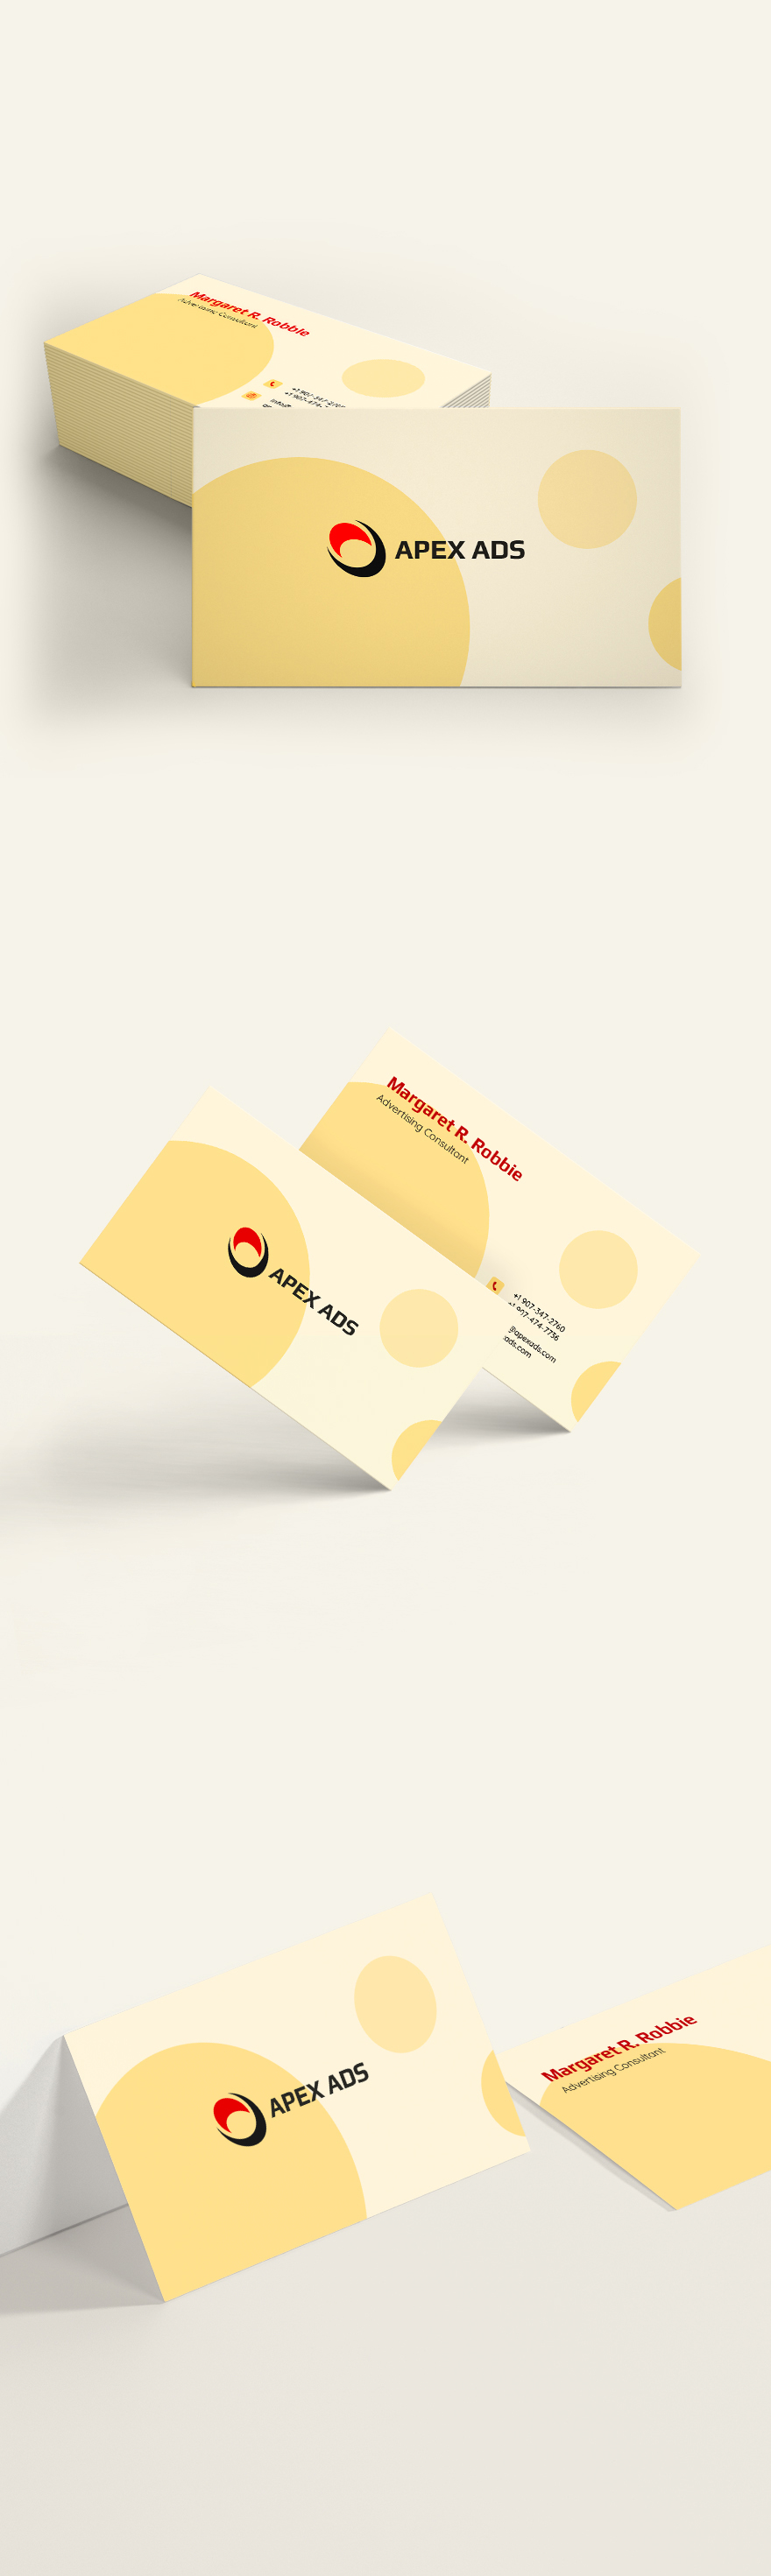 Advertising Consultant Business Card Template